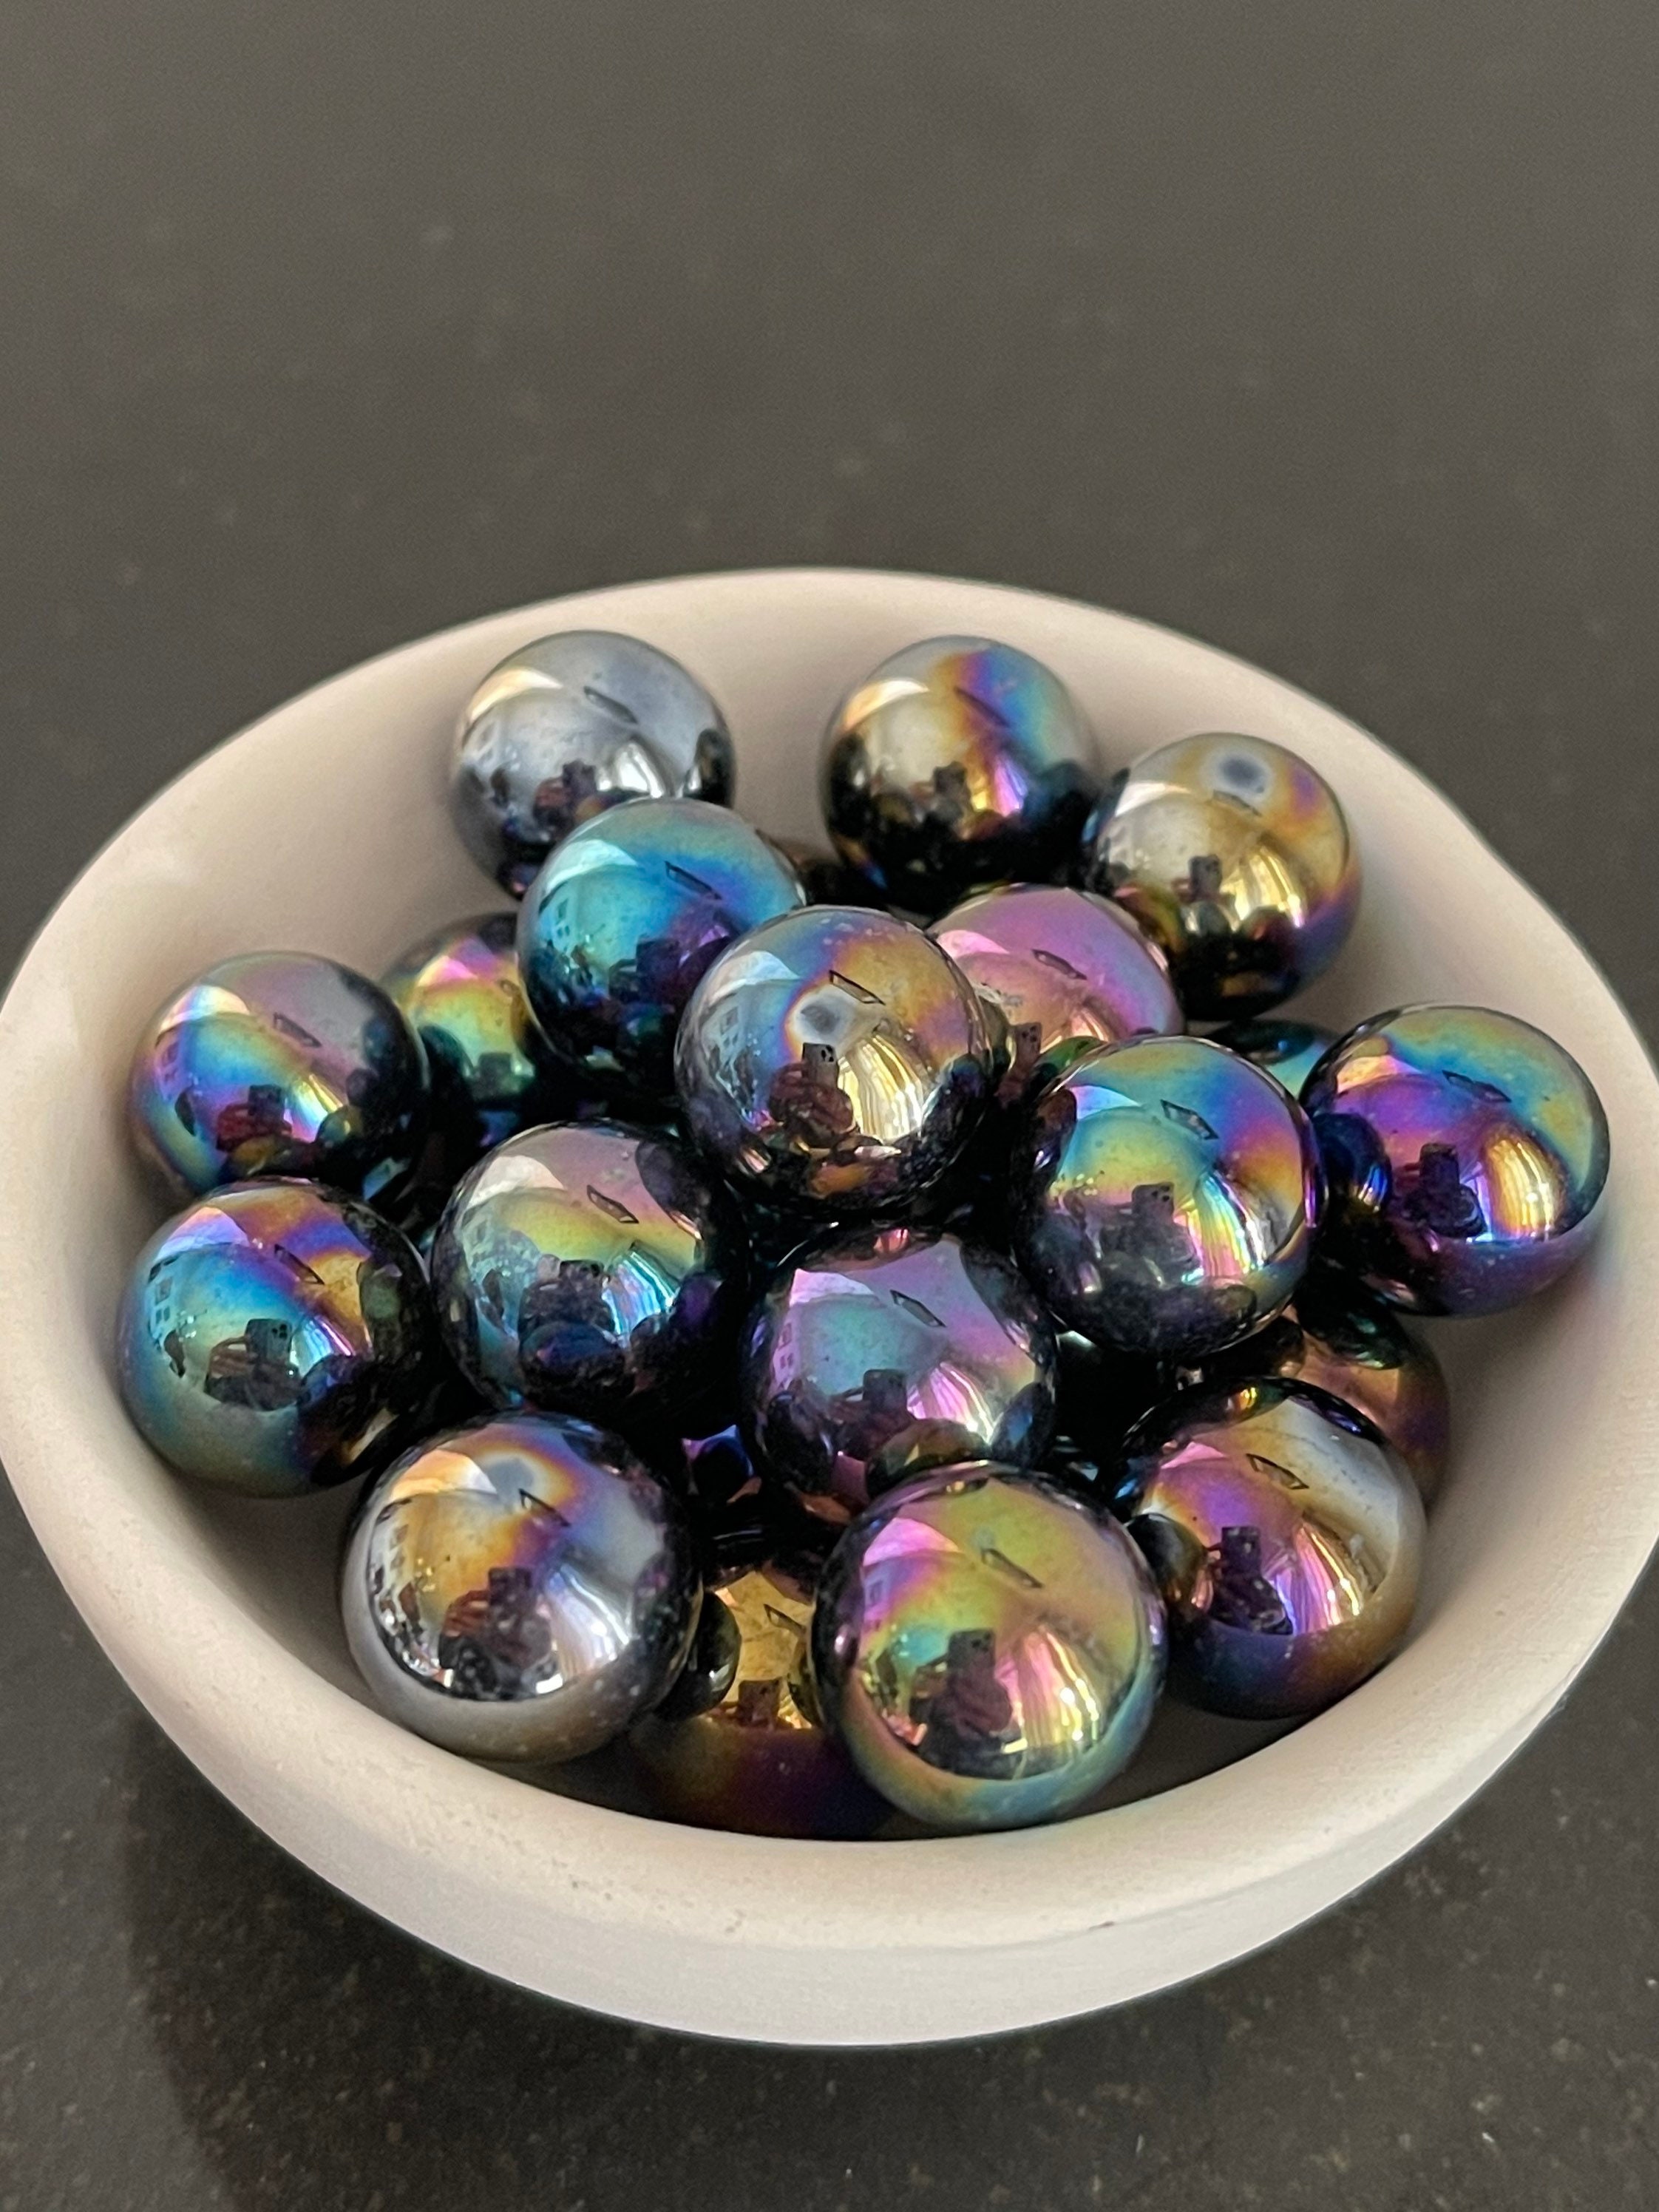 Oil Slick Iridescent Metallic Purple Traditional Glass Pebbles - House of  Marbles US